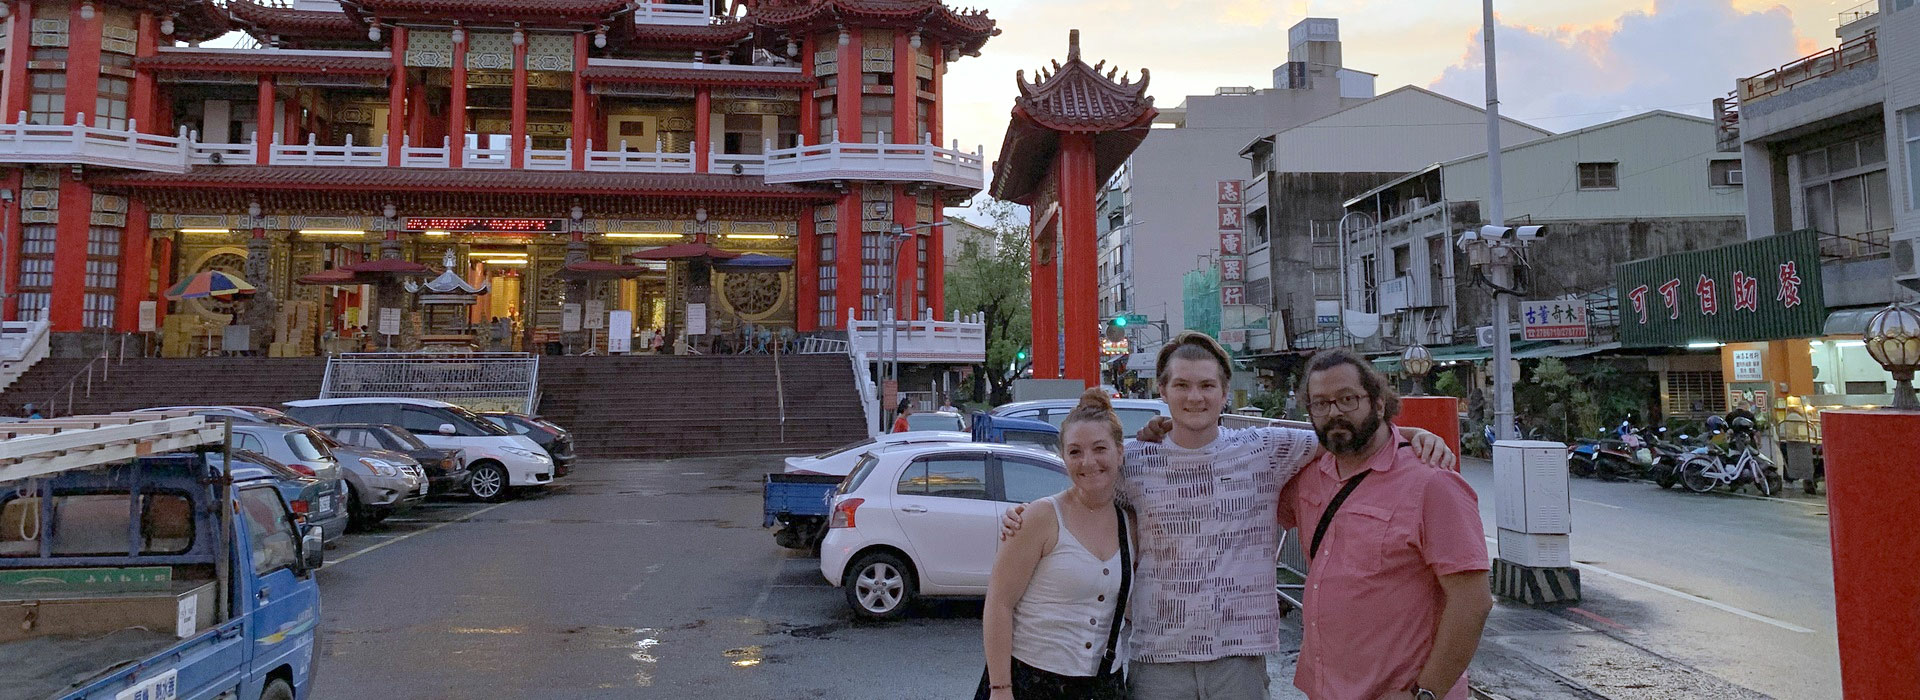 professor and student posing outside traditional building in Taiwan